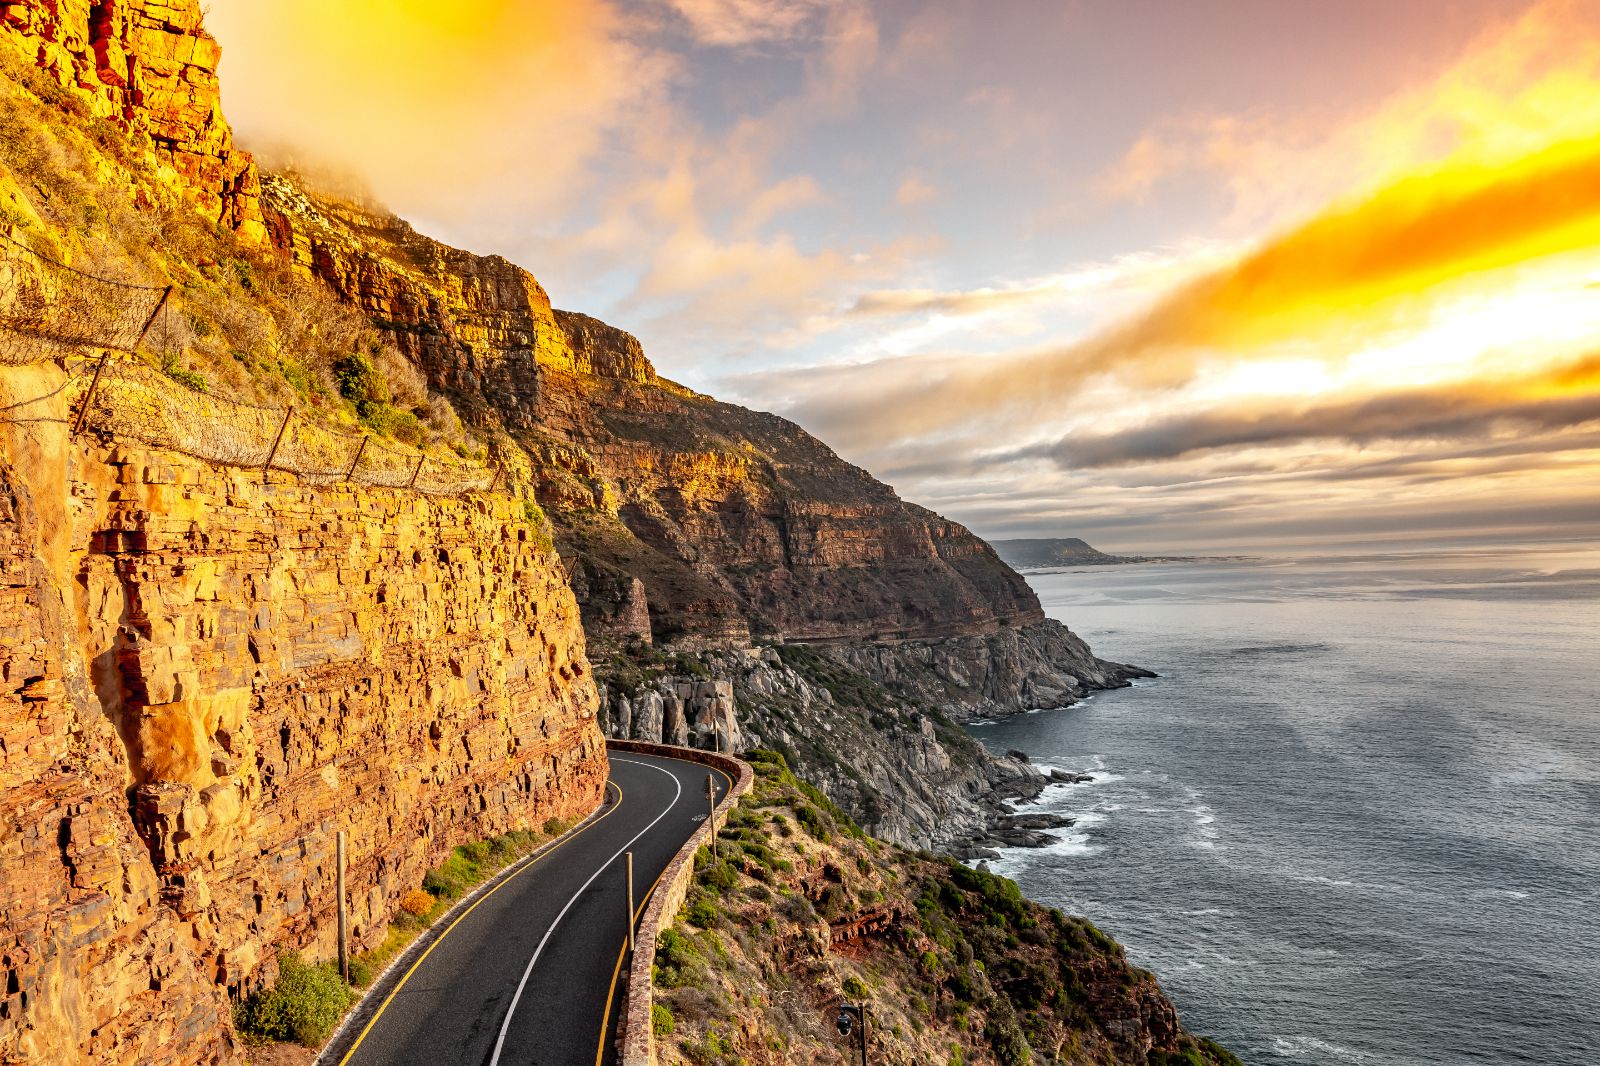 Cliffside road at Chapmans Peak near Cape Town South Africa